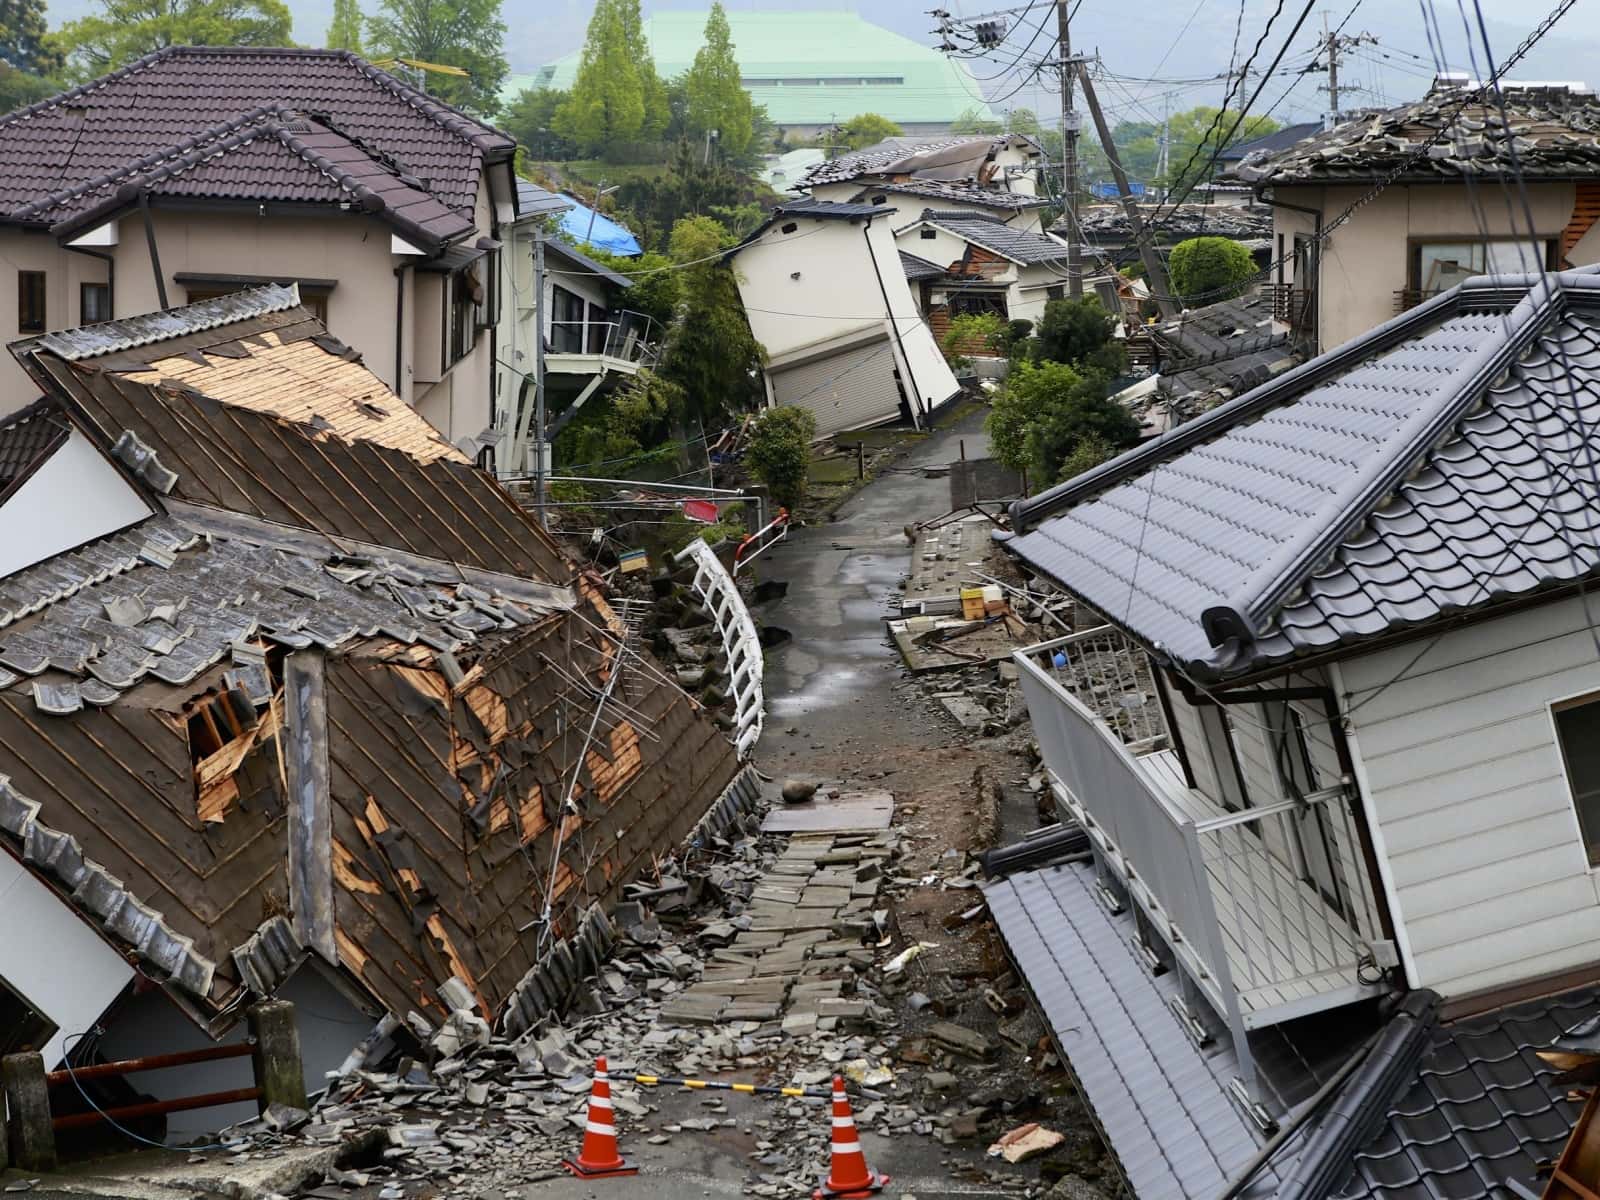 Devastation from the Japan New Yearâ€™s Day earthquake. Photo by Austinding via Shutterstock.com